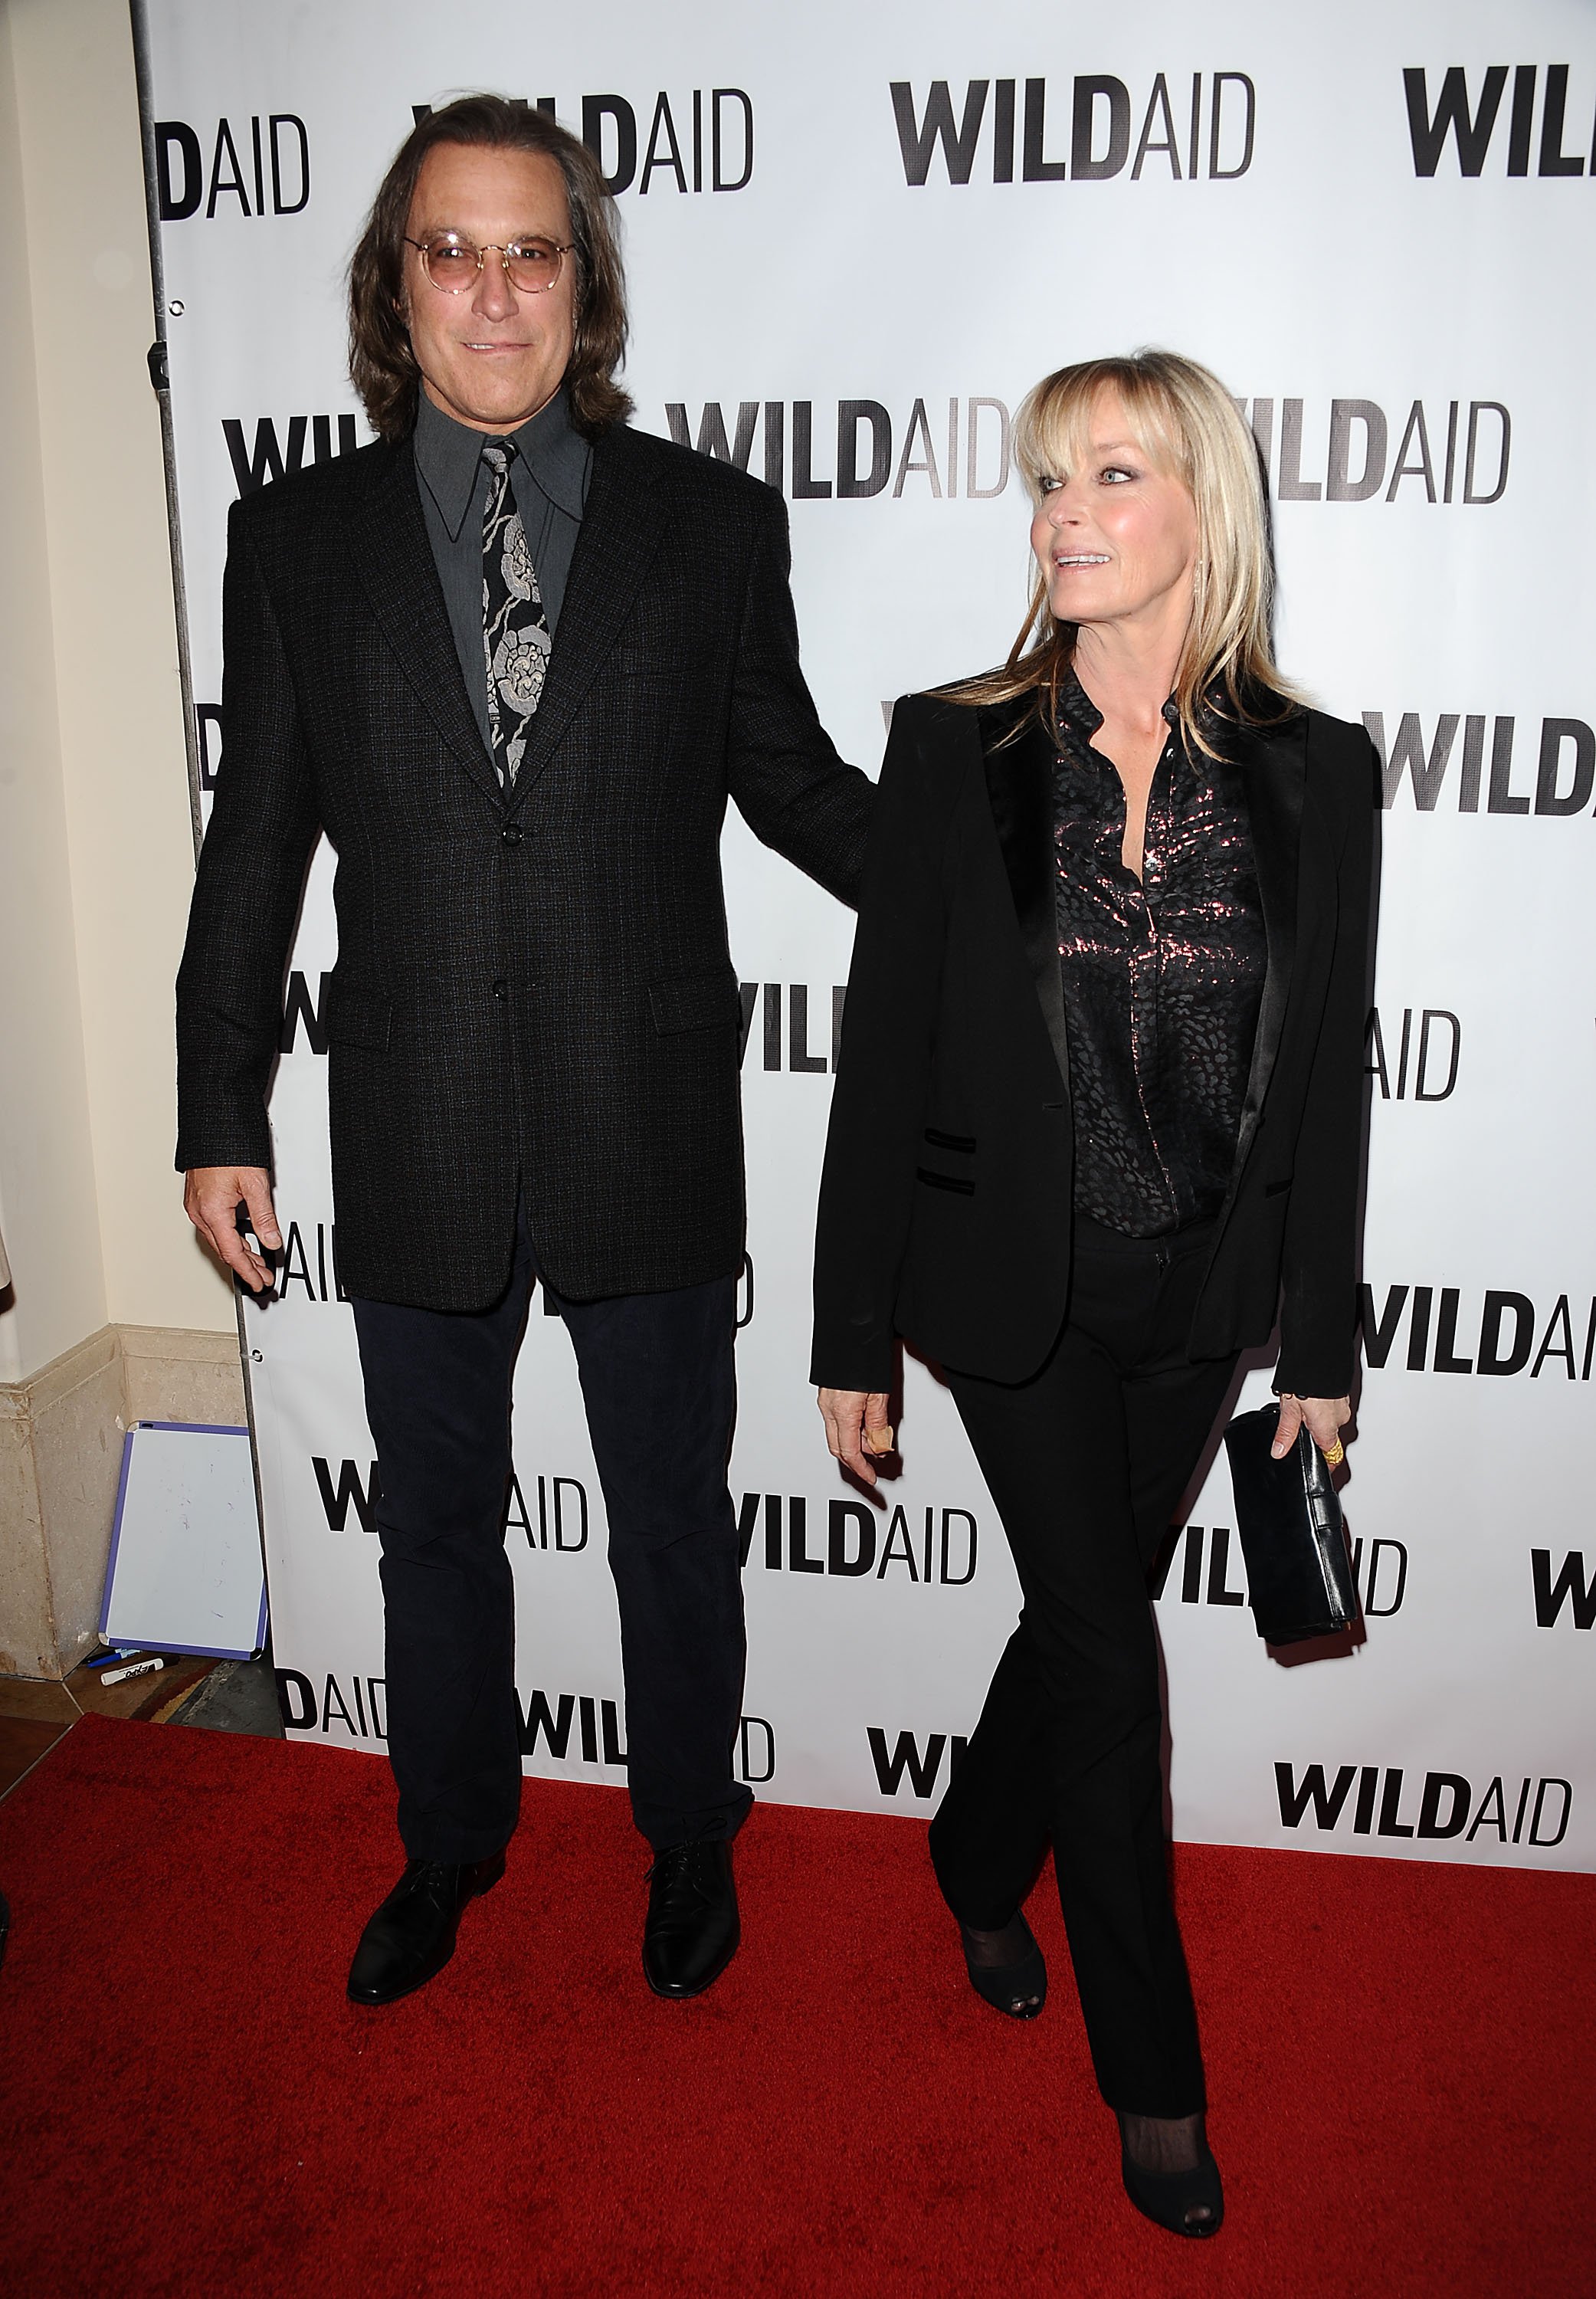 Actor John Corbett and actress Bo Derek attend WildAid 2015 at Montage Hotel on November 7, 2015 in Beverly Hills, California | Source: Getty Images 